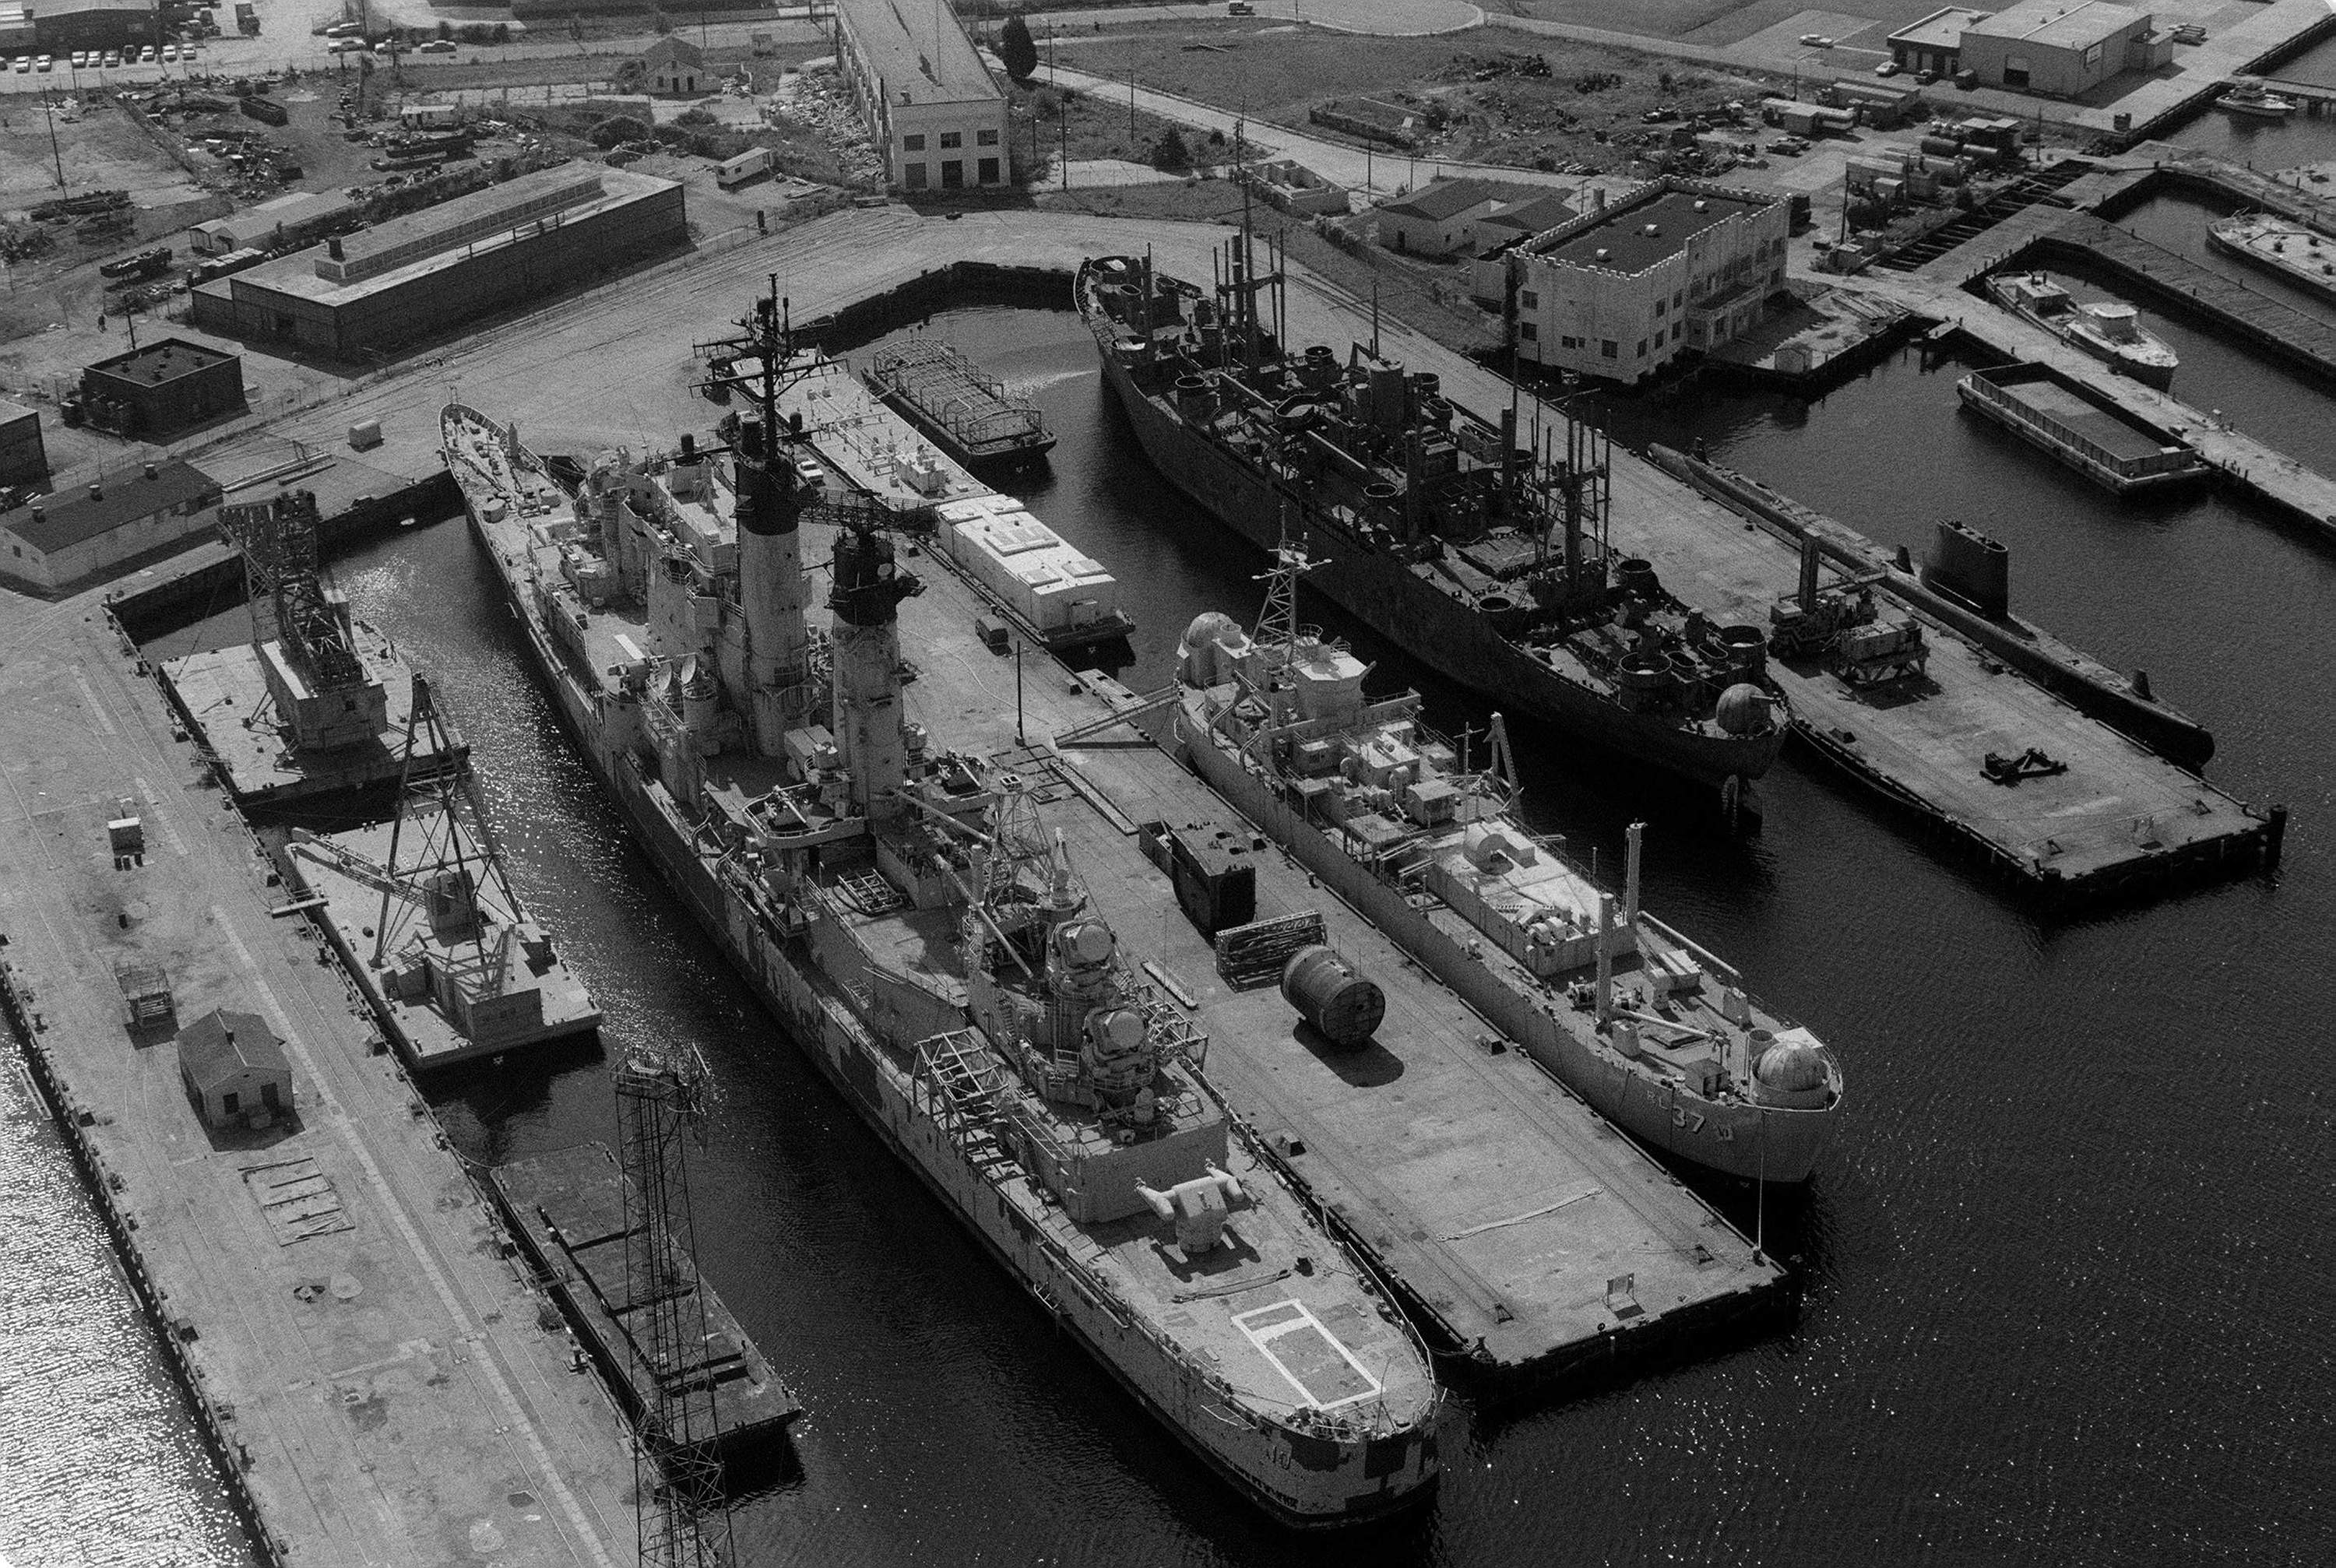 Guided missile cruiser Albany, landing craft repair ship Indira, a Haskell-class attack transport, and submarine Blenny at the St. Helena Annex of Norfolk Naval Shipyard, Virginia, United States, 1 Nov 1983